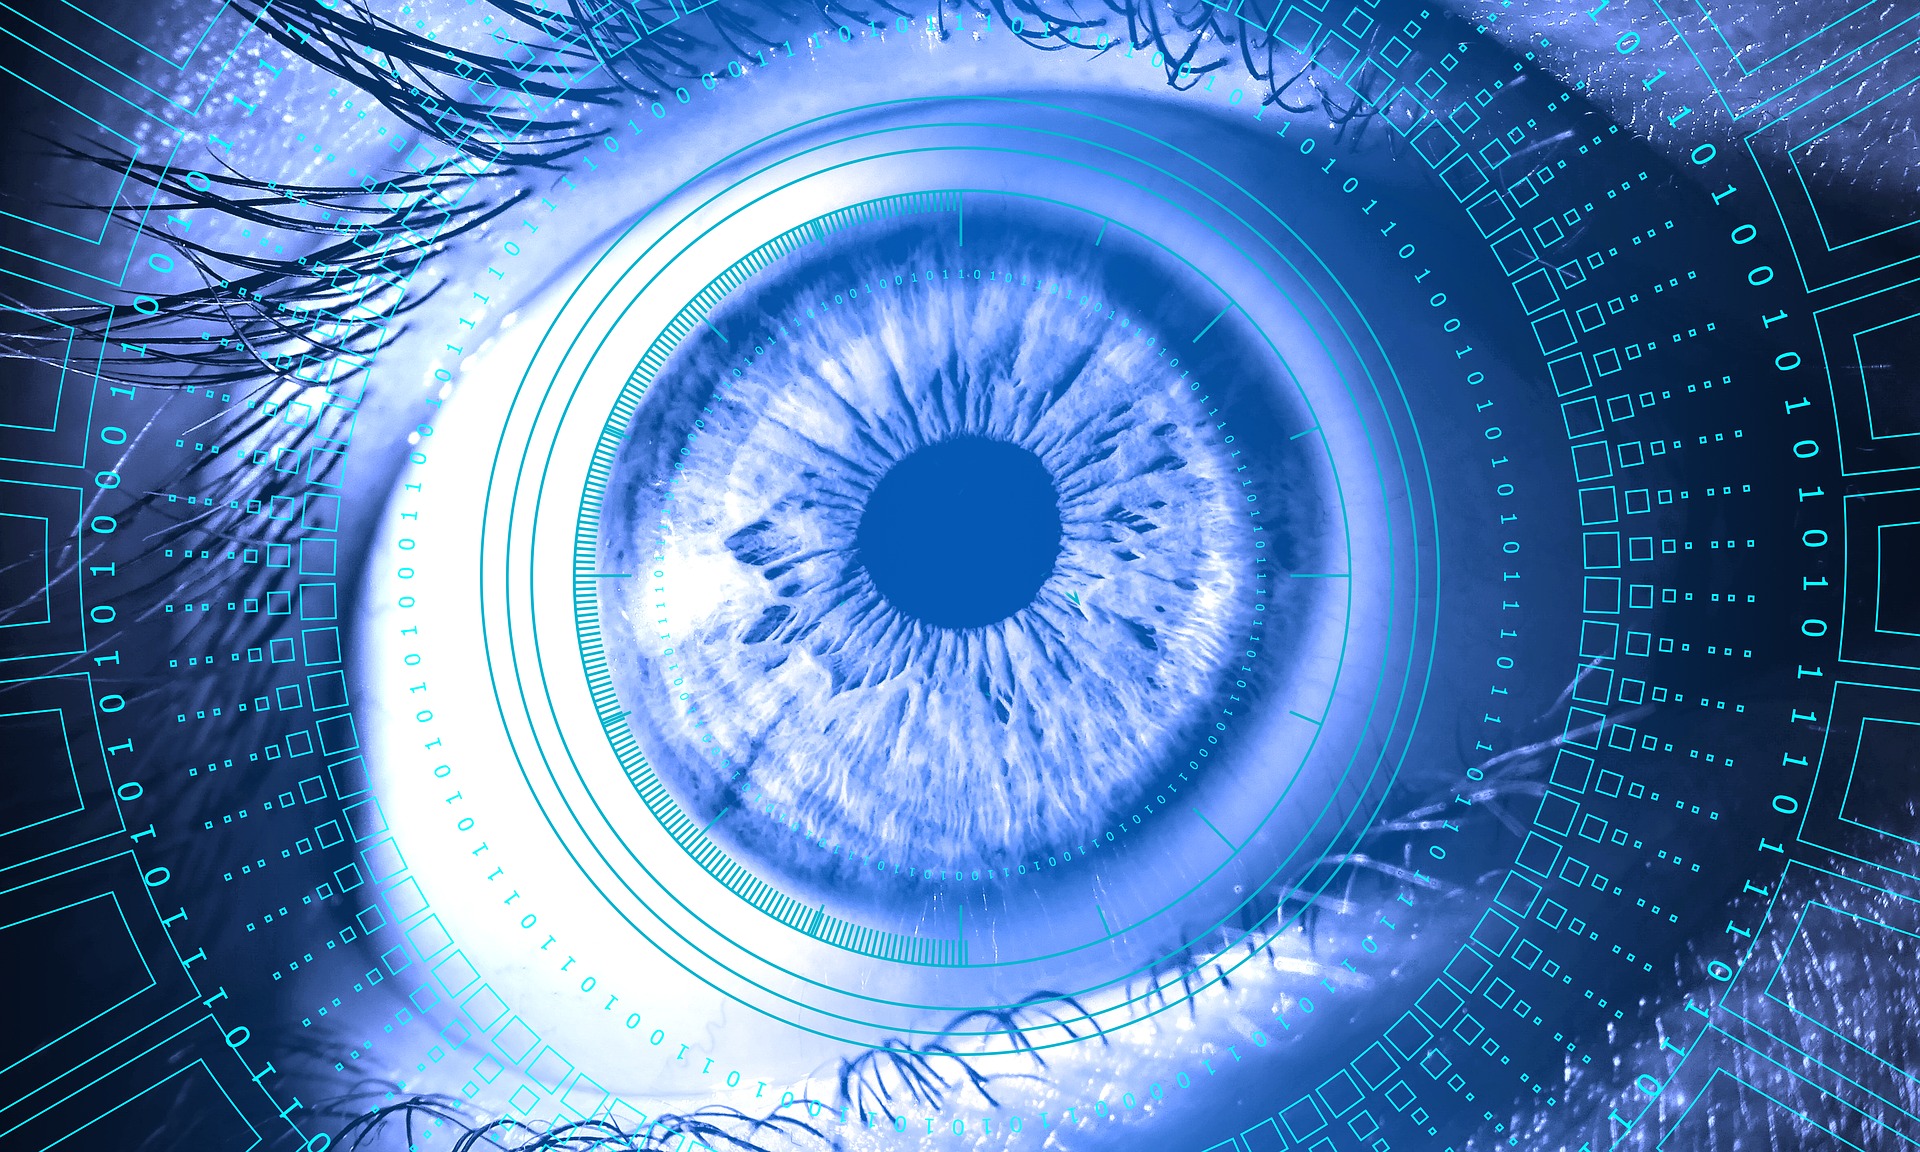 Project QualiTED, Computer Vision Eye 